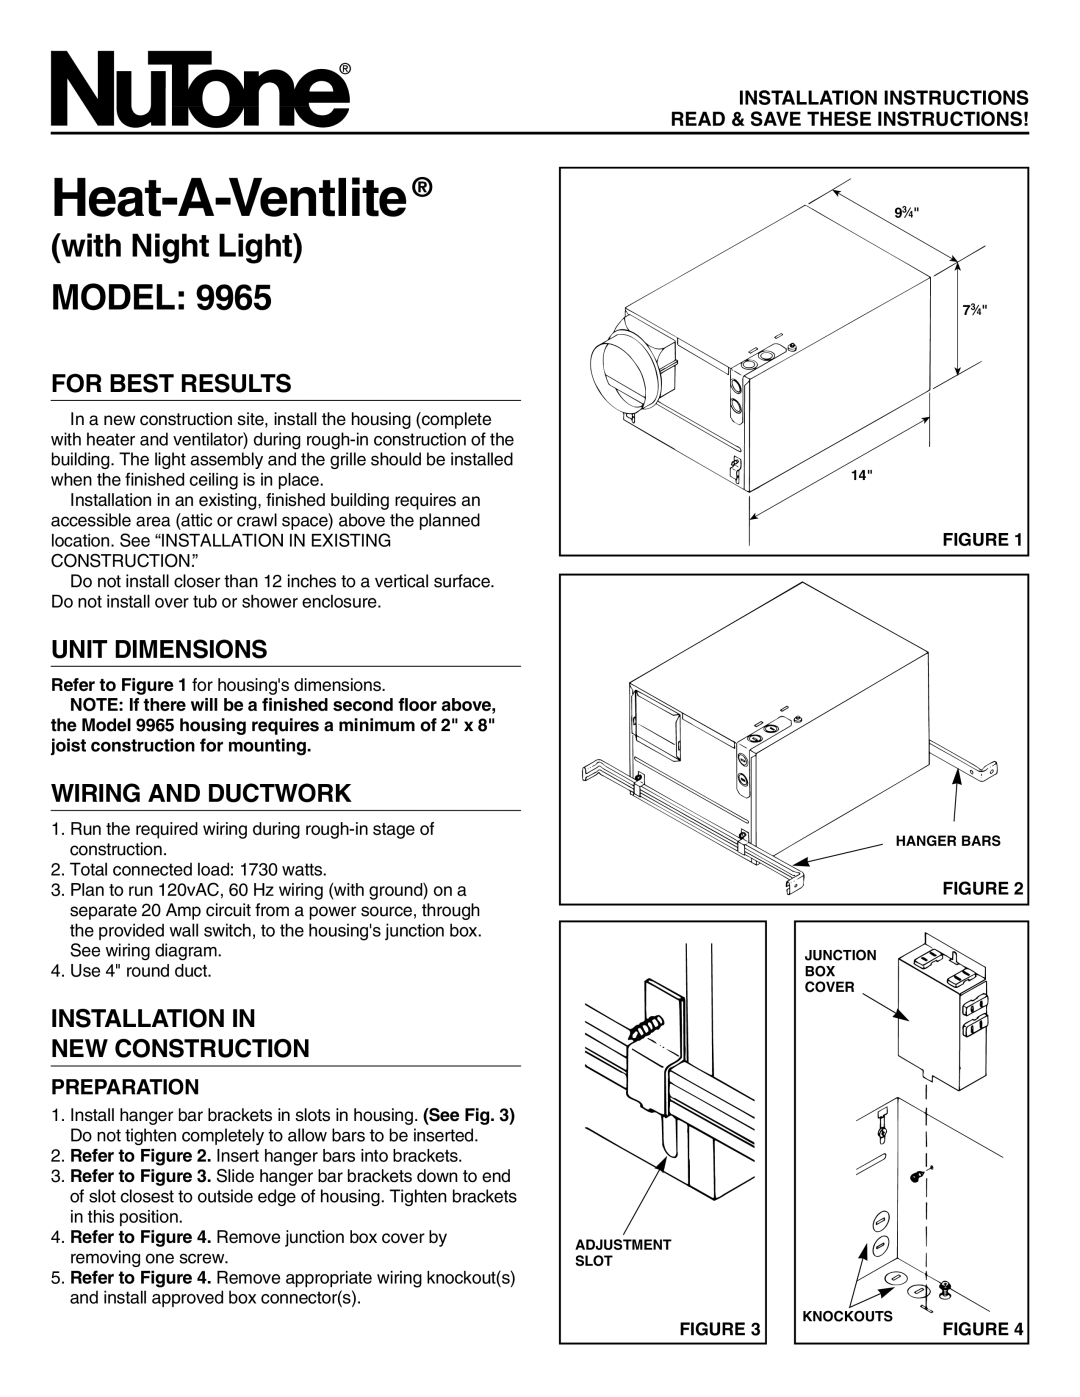 NuTone 9965 installation instructions For Best Results, Unit Dimensions, Wiring And Ductwork, Preparation, Heat-A-Ventlite 